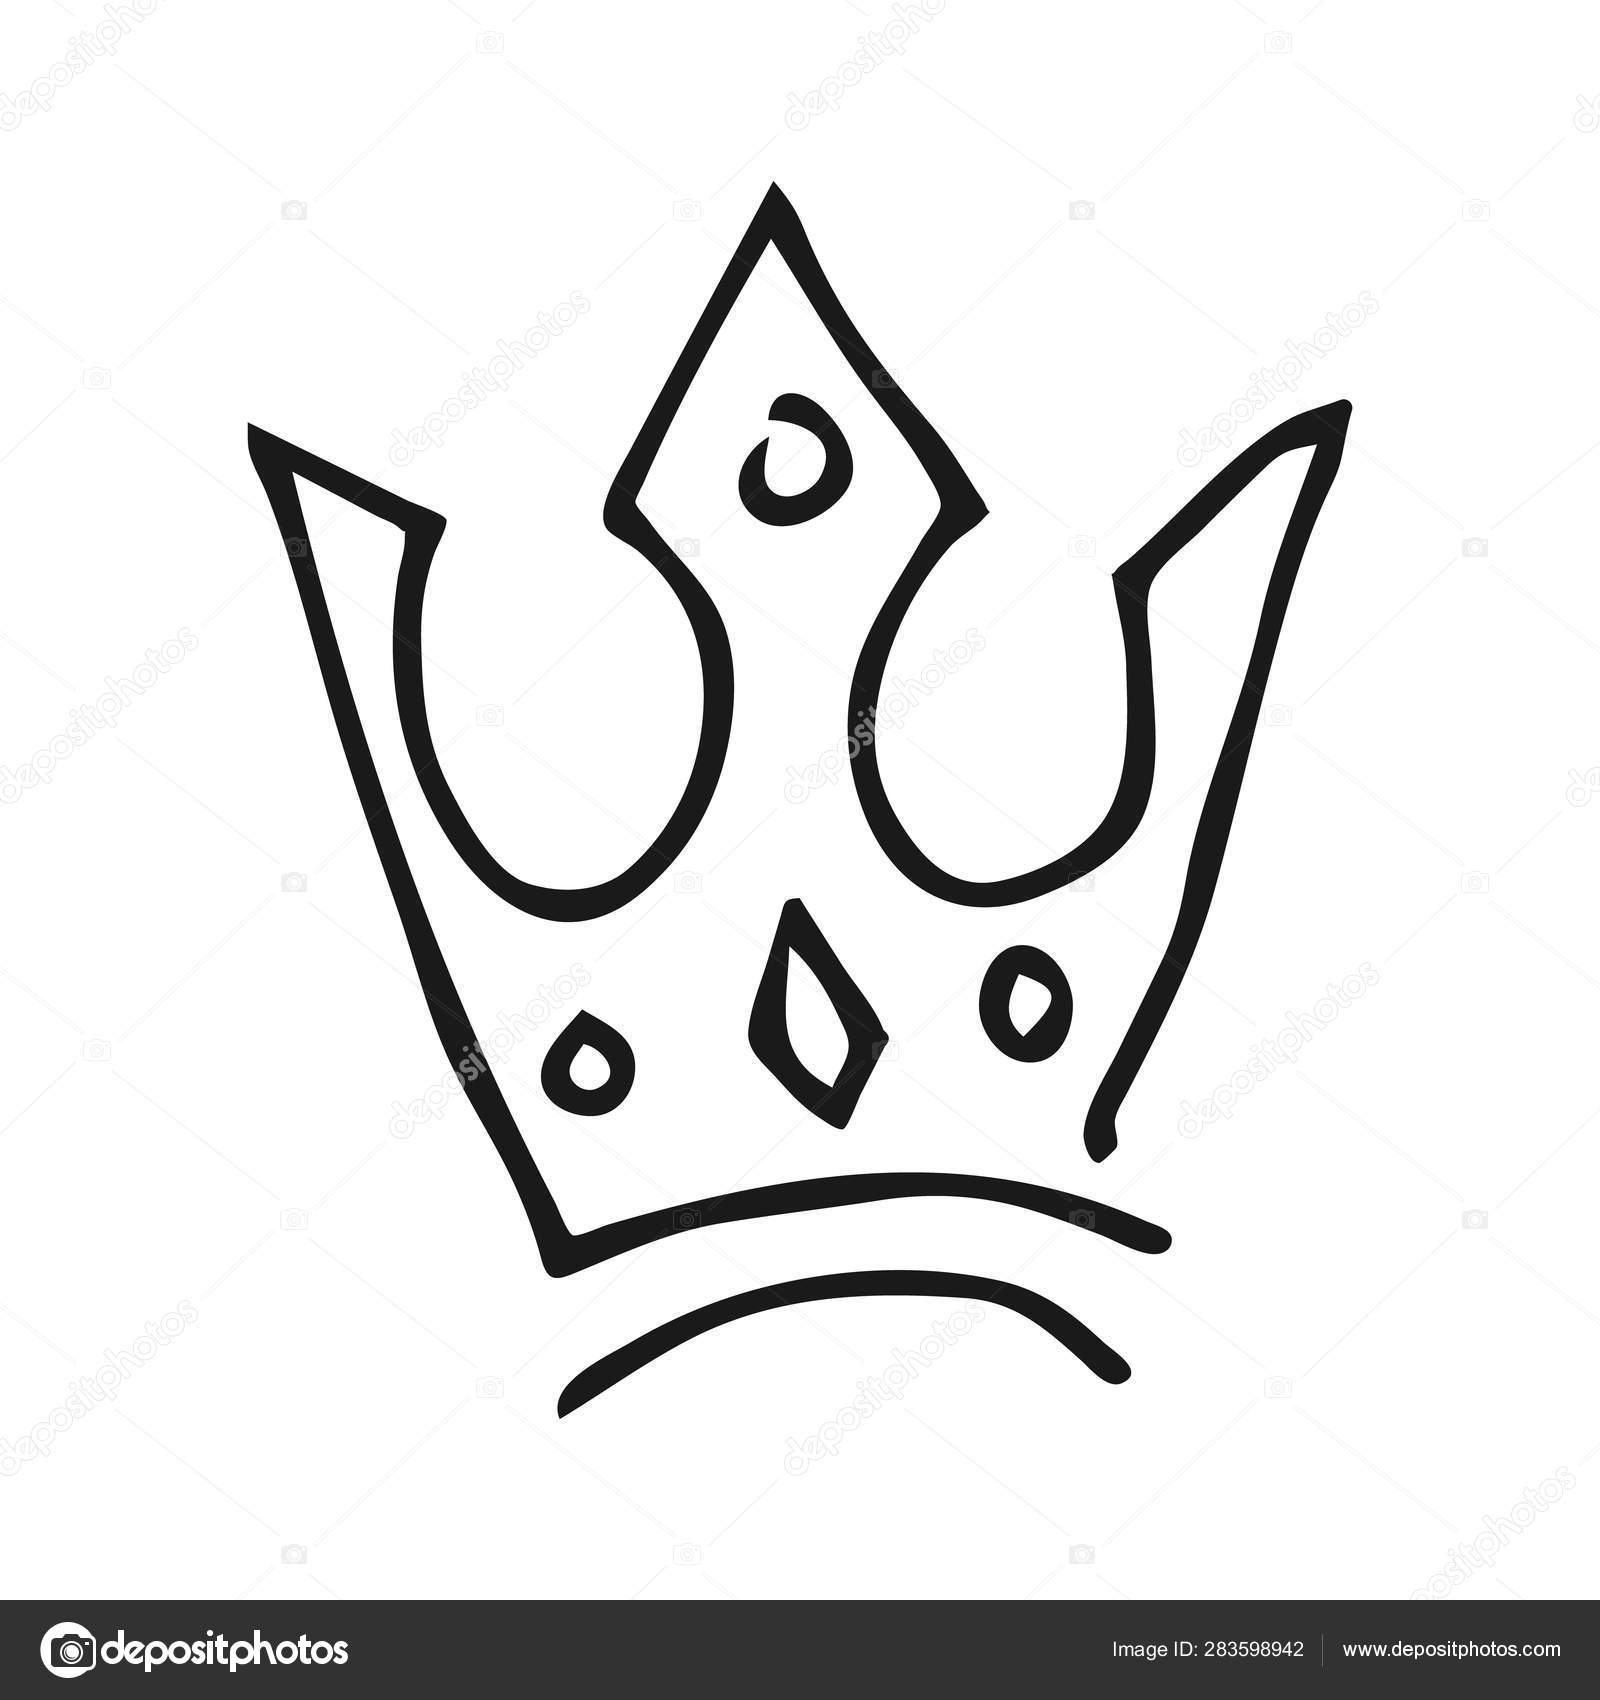 Simple Graffiti Sketch Queen Or King Crown Stock Vector